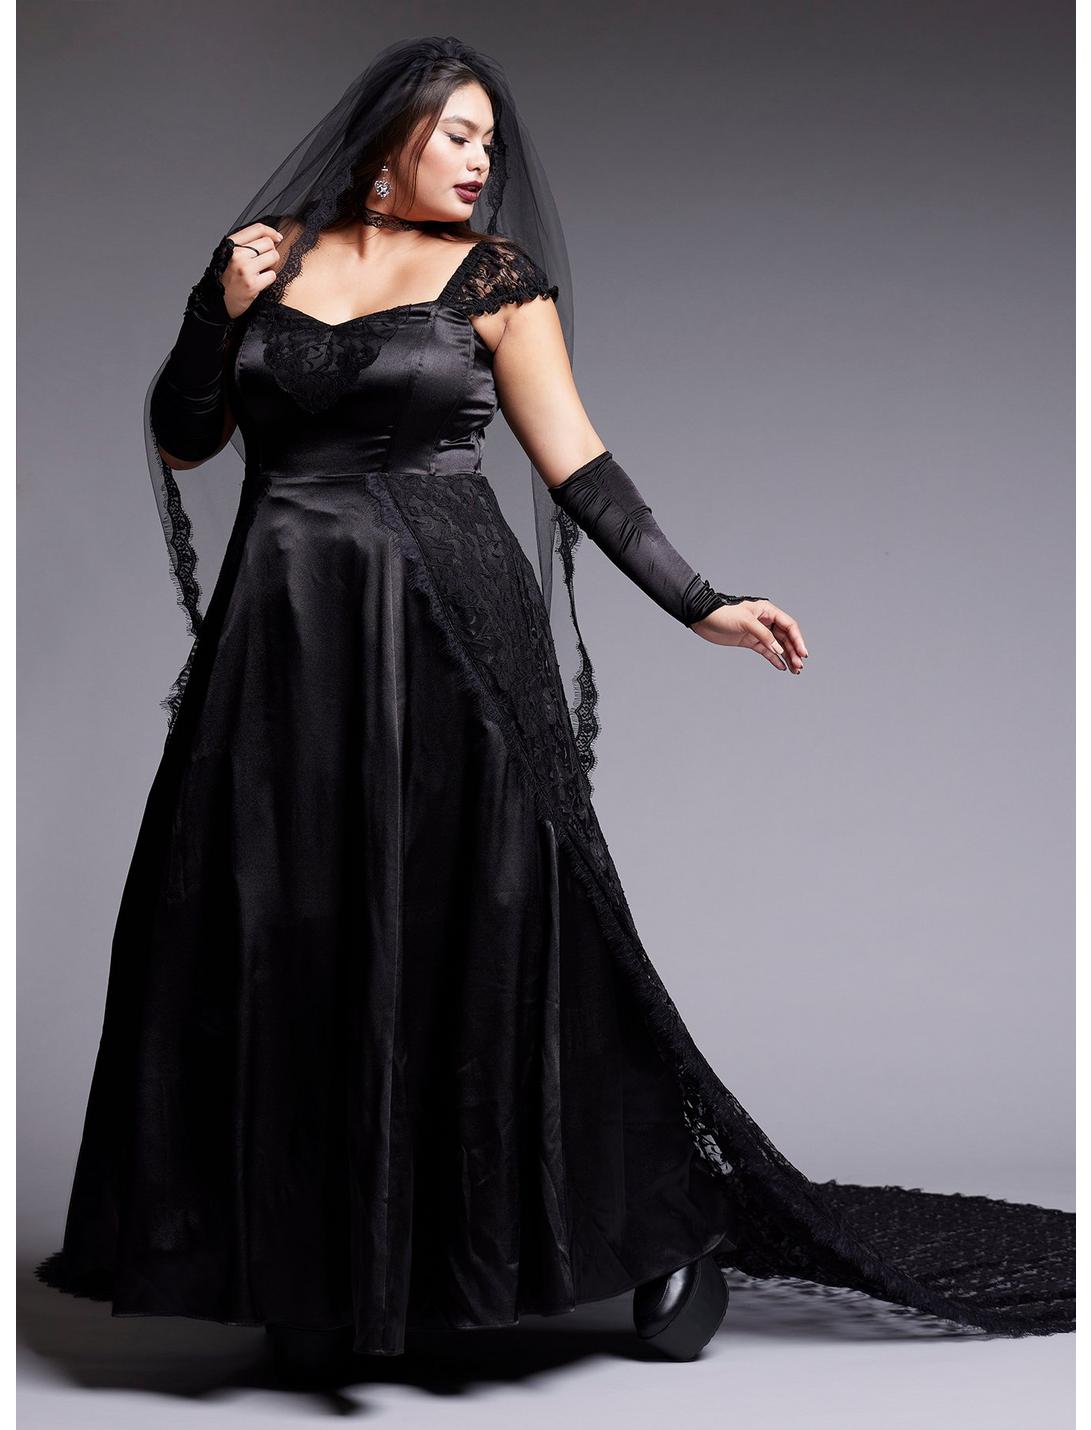 Black Lace Gothic Special Occasion Dress Plus Size Limited Edition, BLACK, hi-res